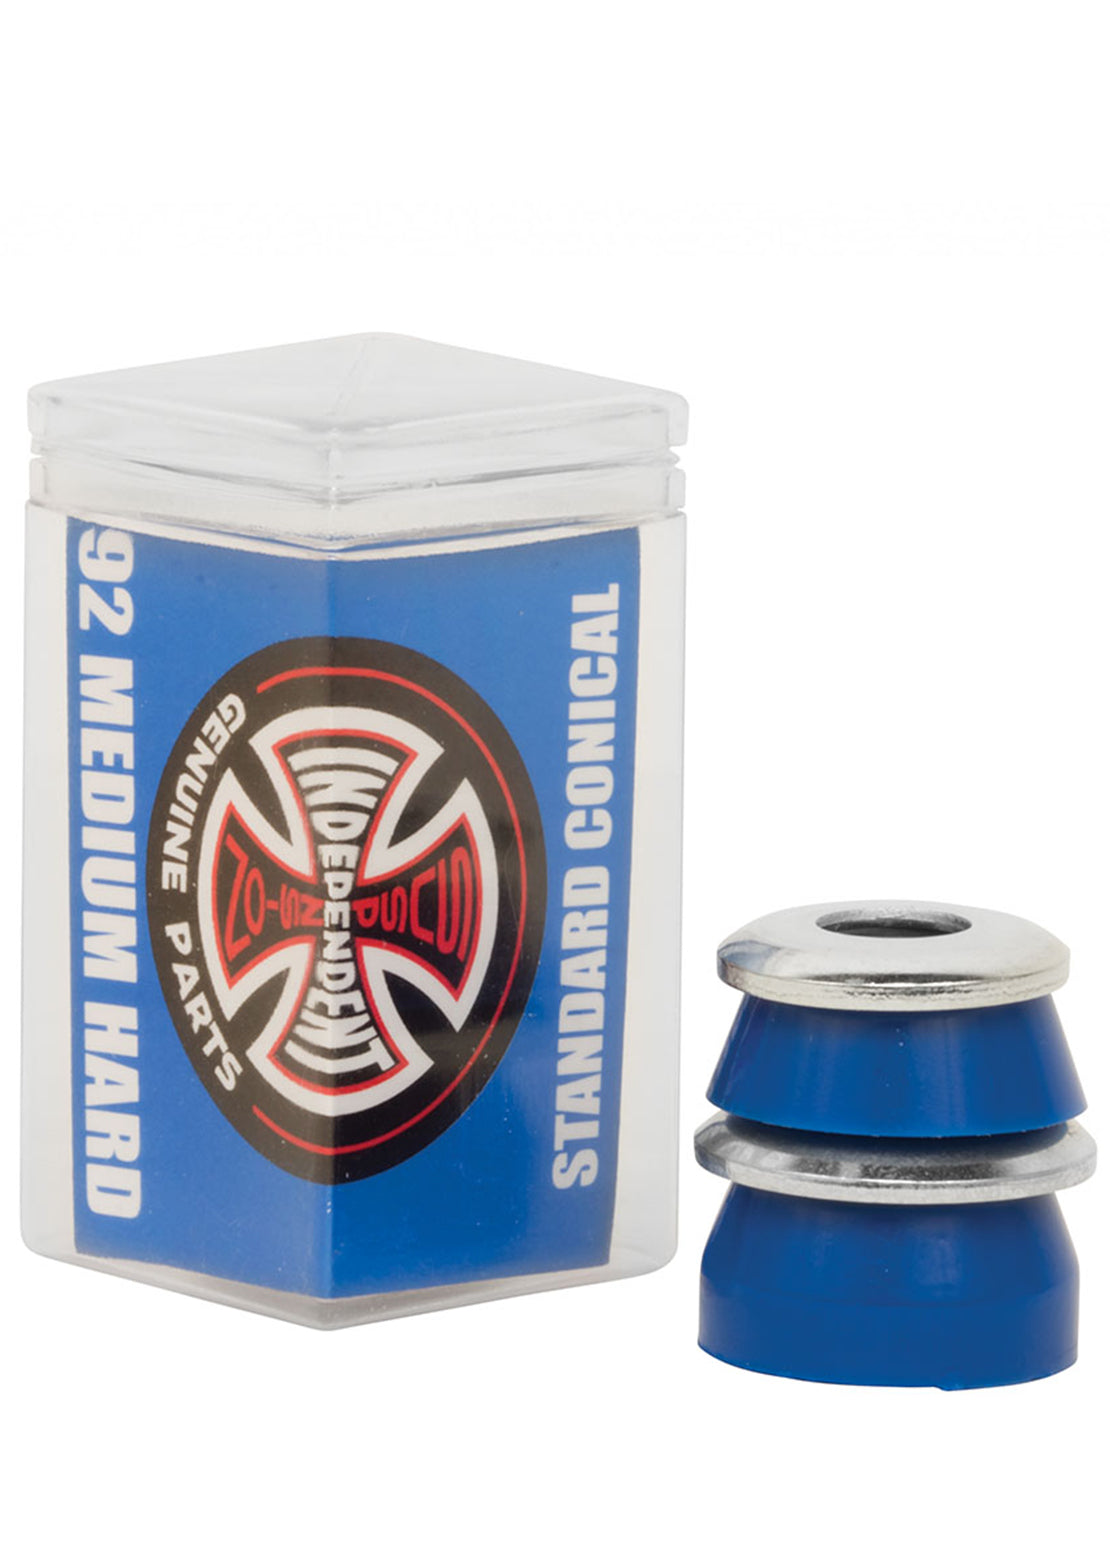 Independent Standard Bushings Blue - Conical - Medium Hard - 92a